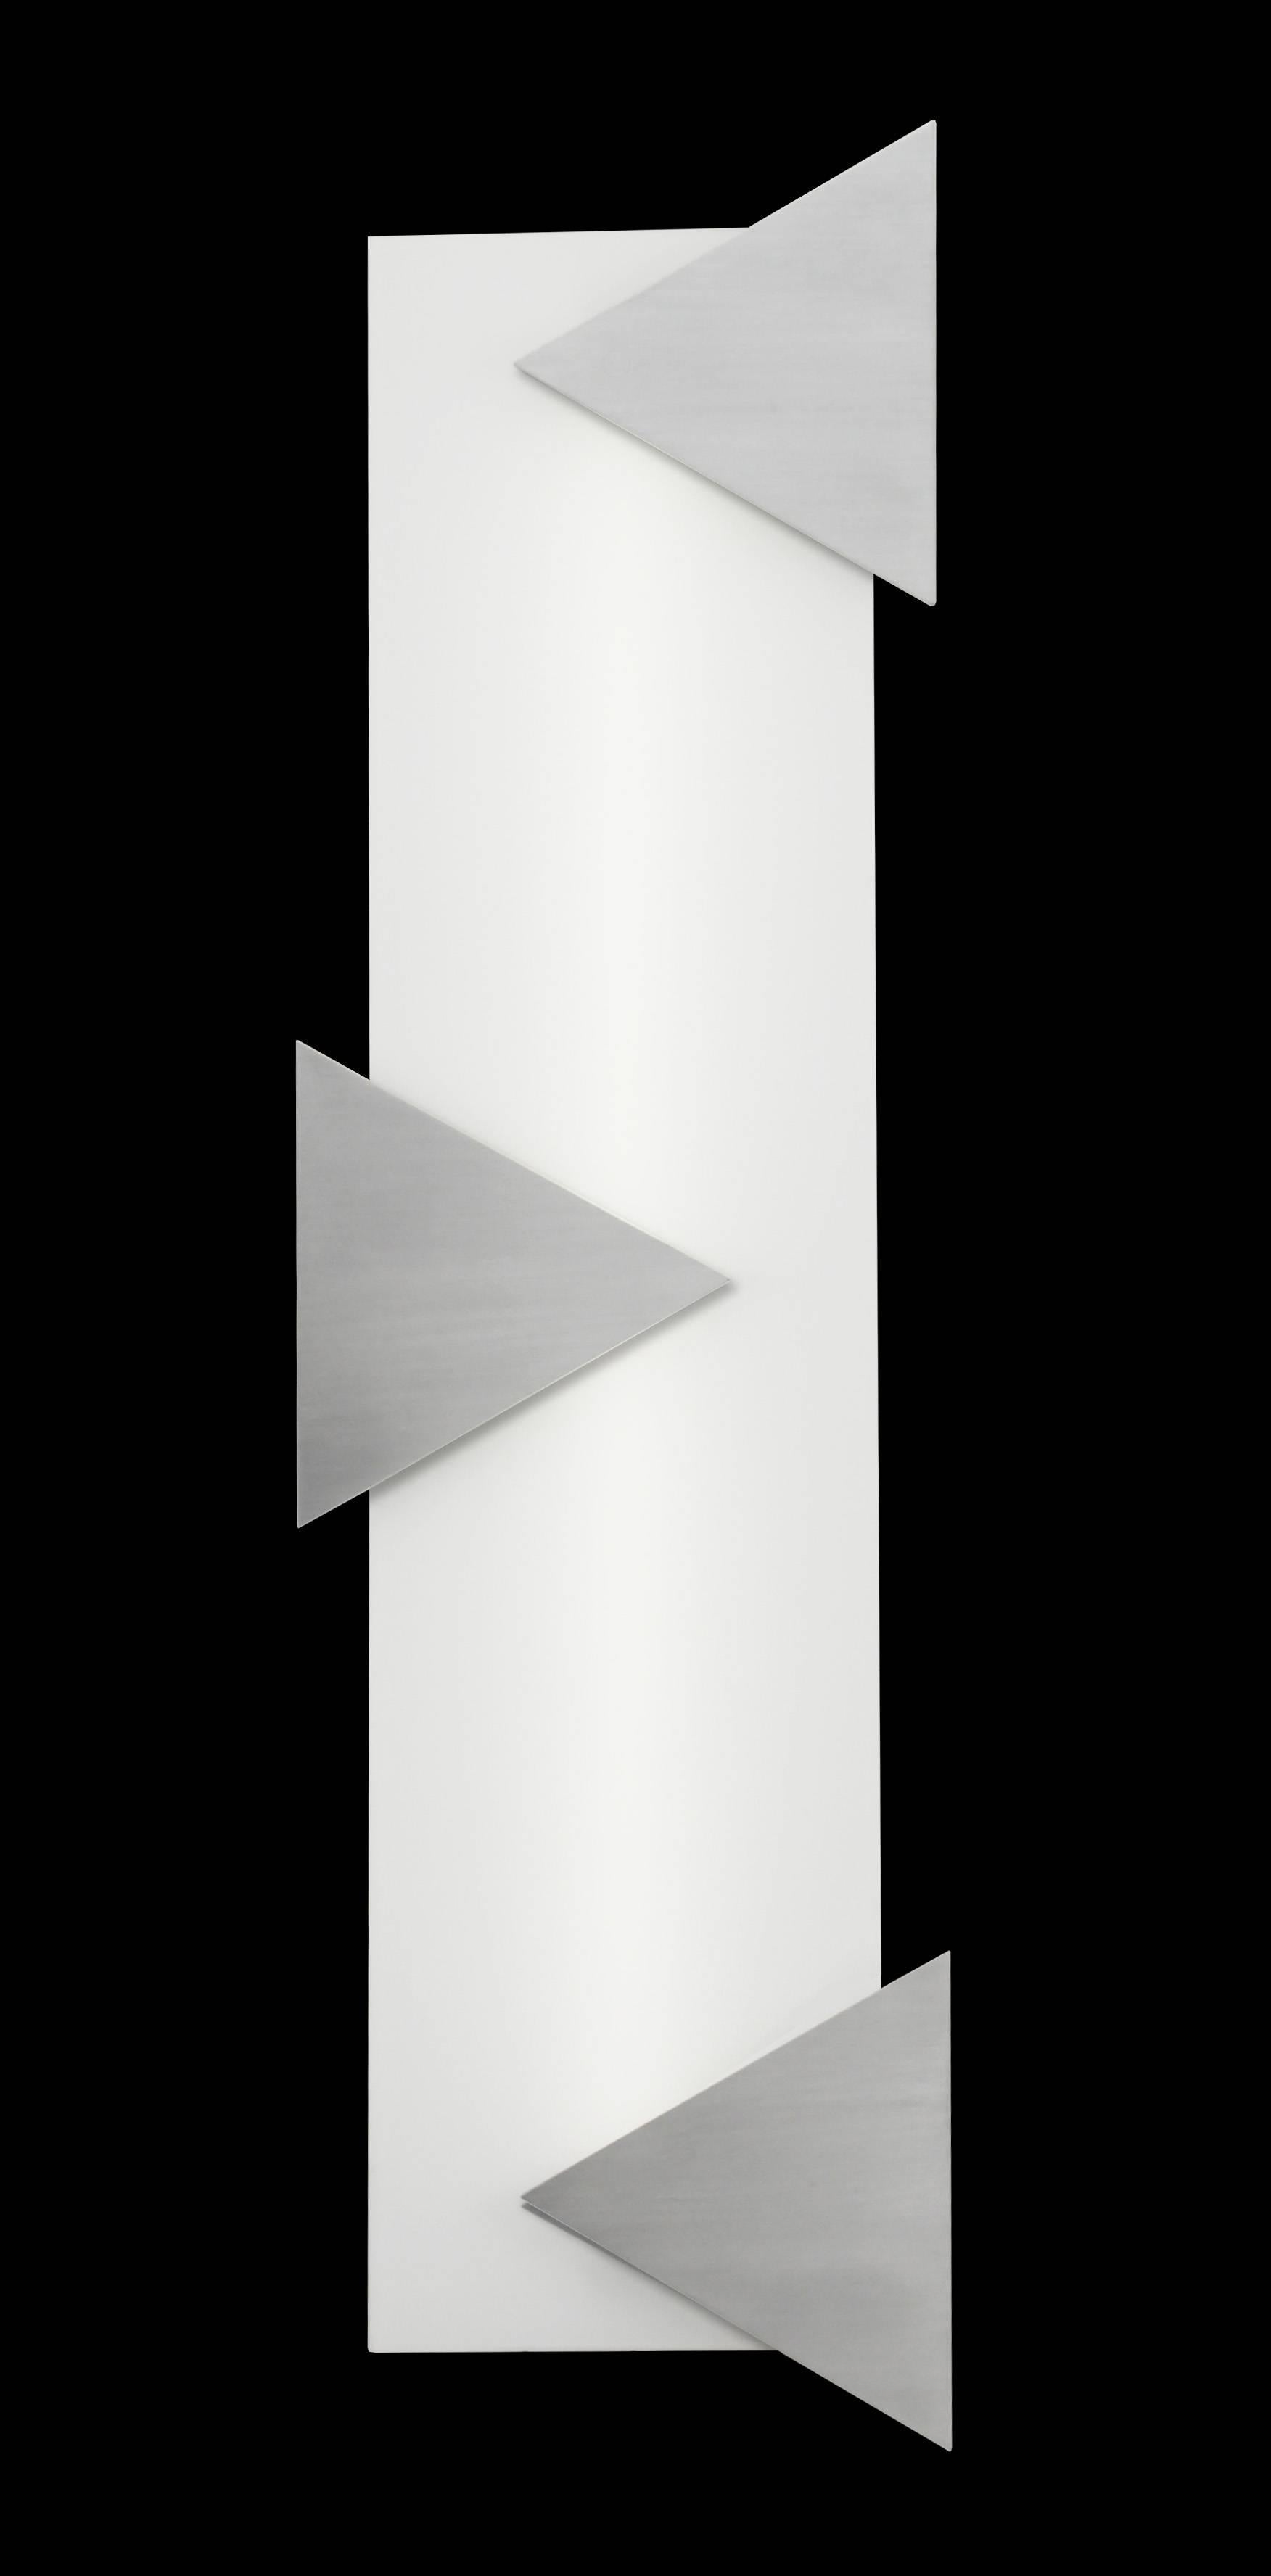 Triangular aluminium panels and white glass wall sculpture. Can be used in place of wall art as a decorative feature. In the manner of Mid-Century Modern design style with a Pop-Art feel. LED illuminated 3000K standard color temperature. Shown as a